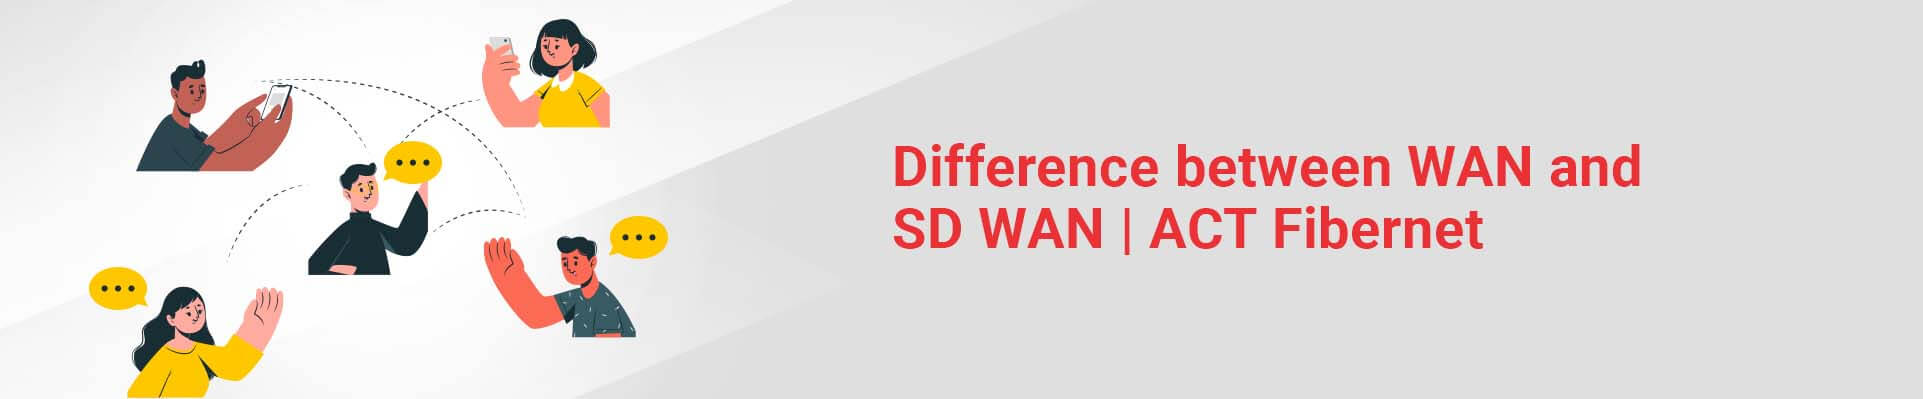 What is the Difference Between WAN and SD-WAN?